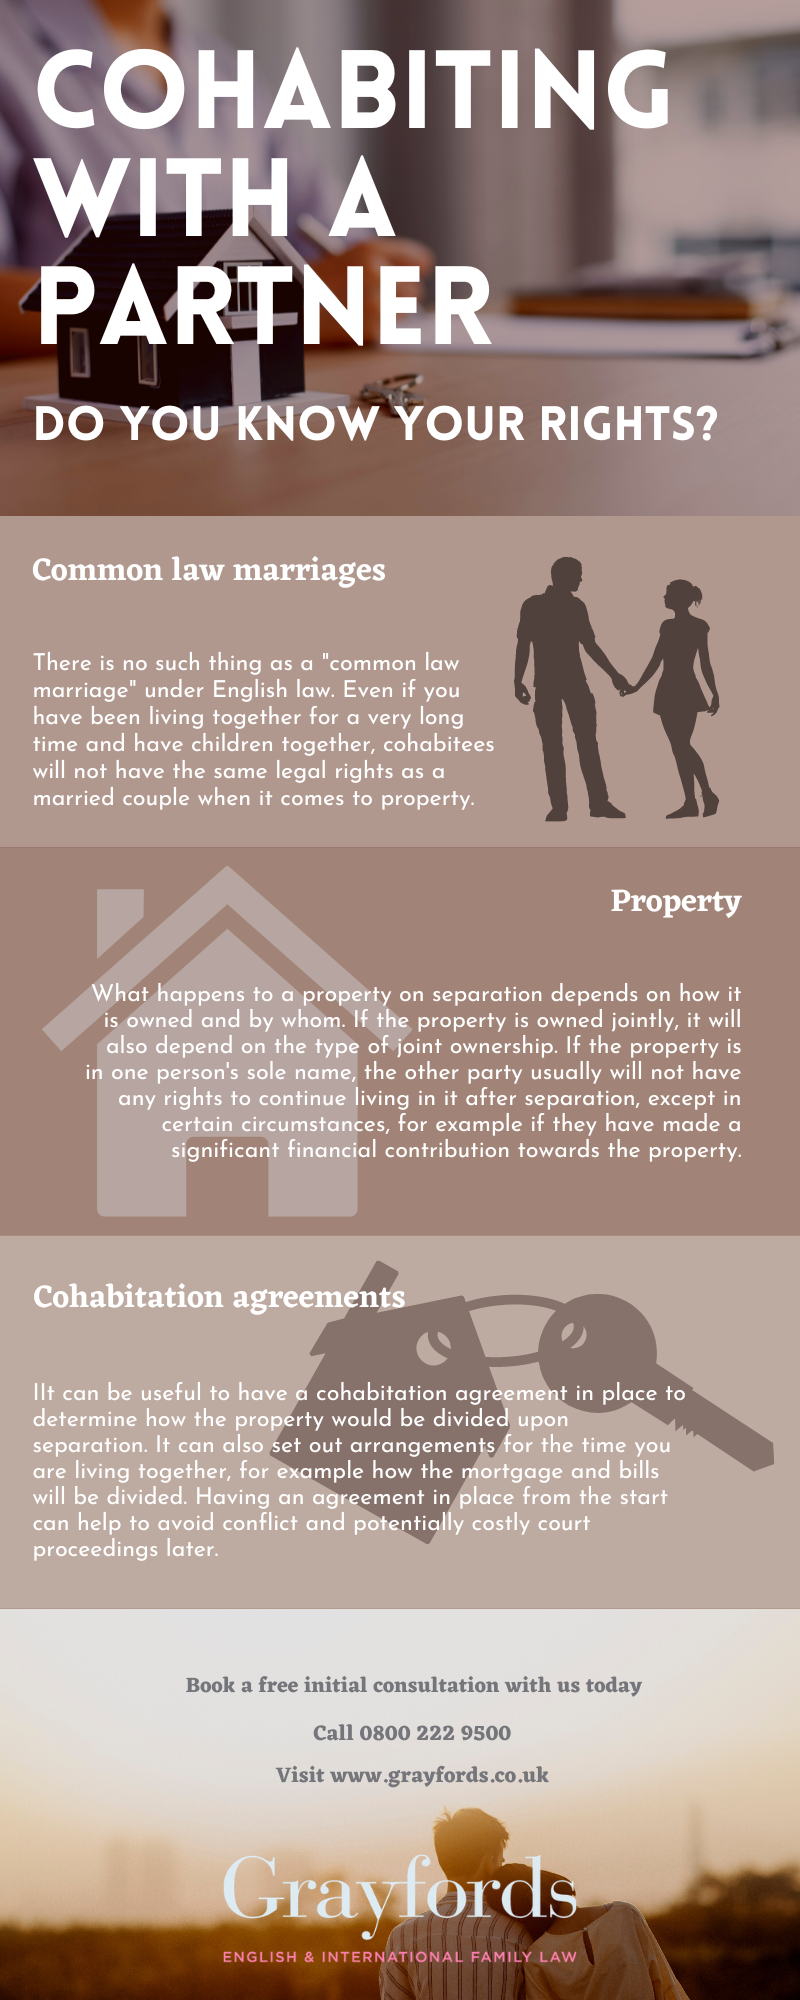 Cohabiting With A Partner: Do You Know Your Rights?